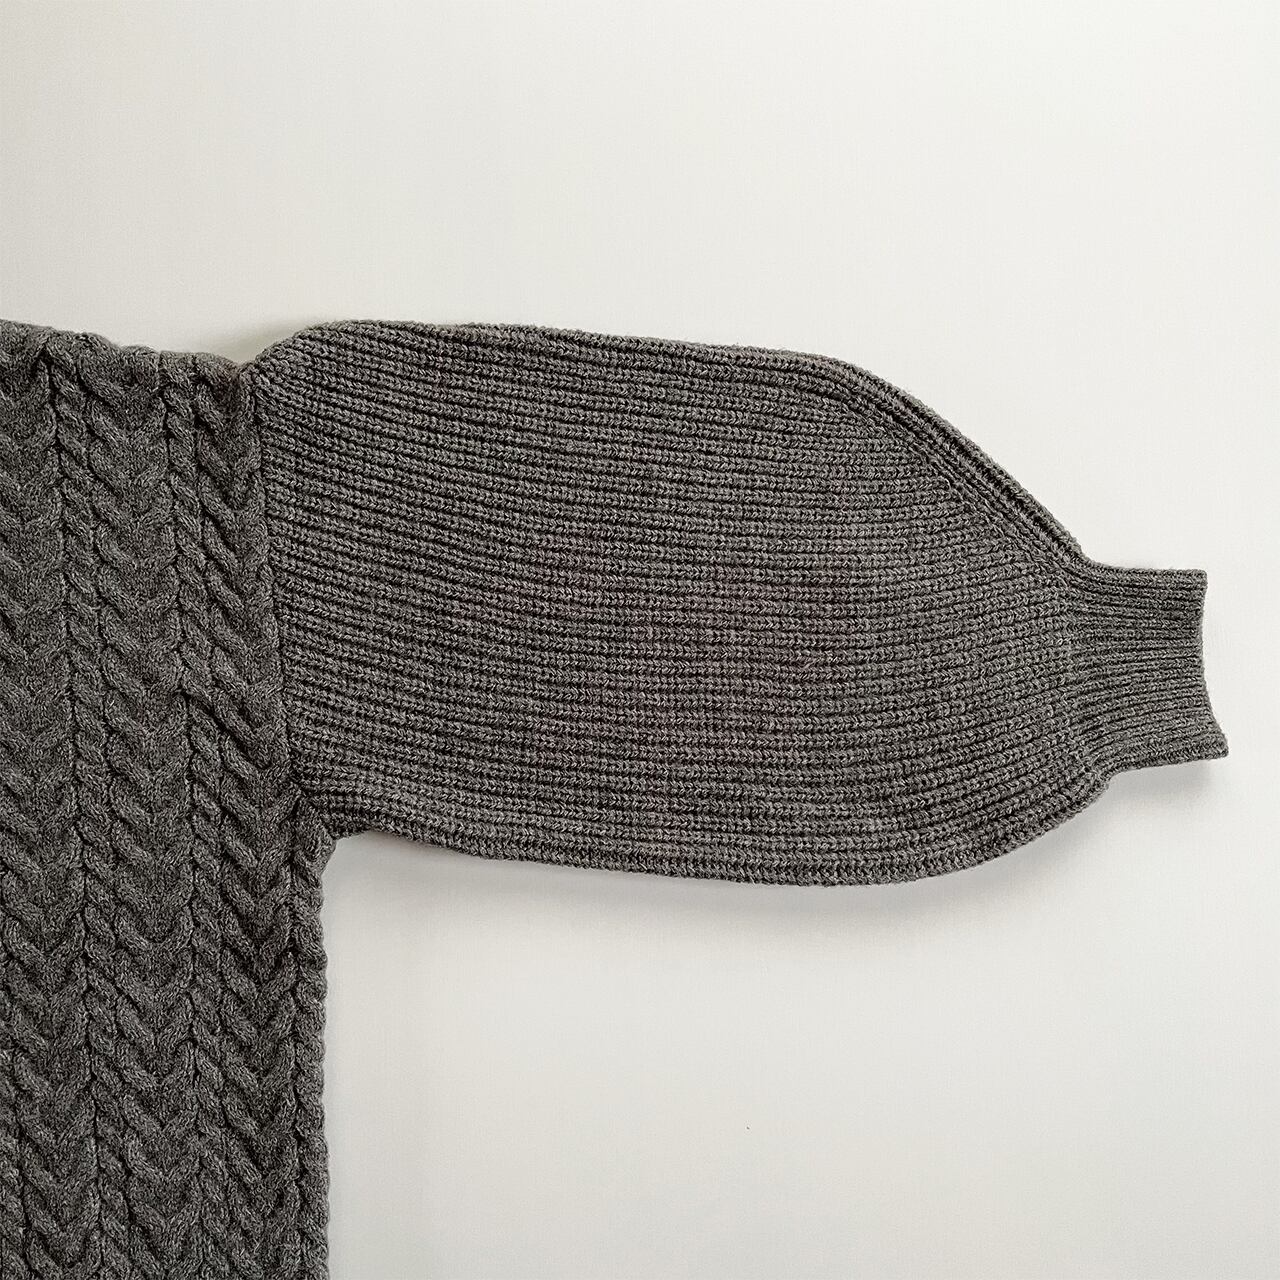 Double zip cable knit cardigan (charcoal)